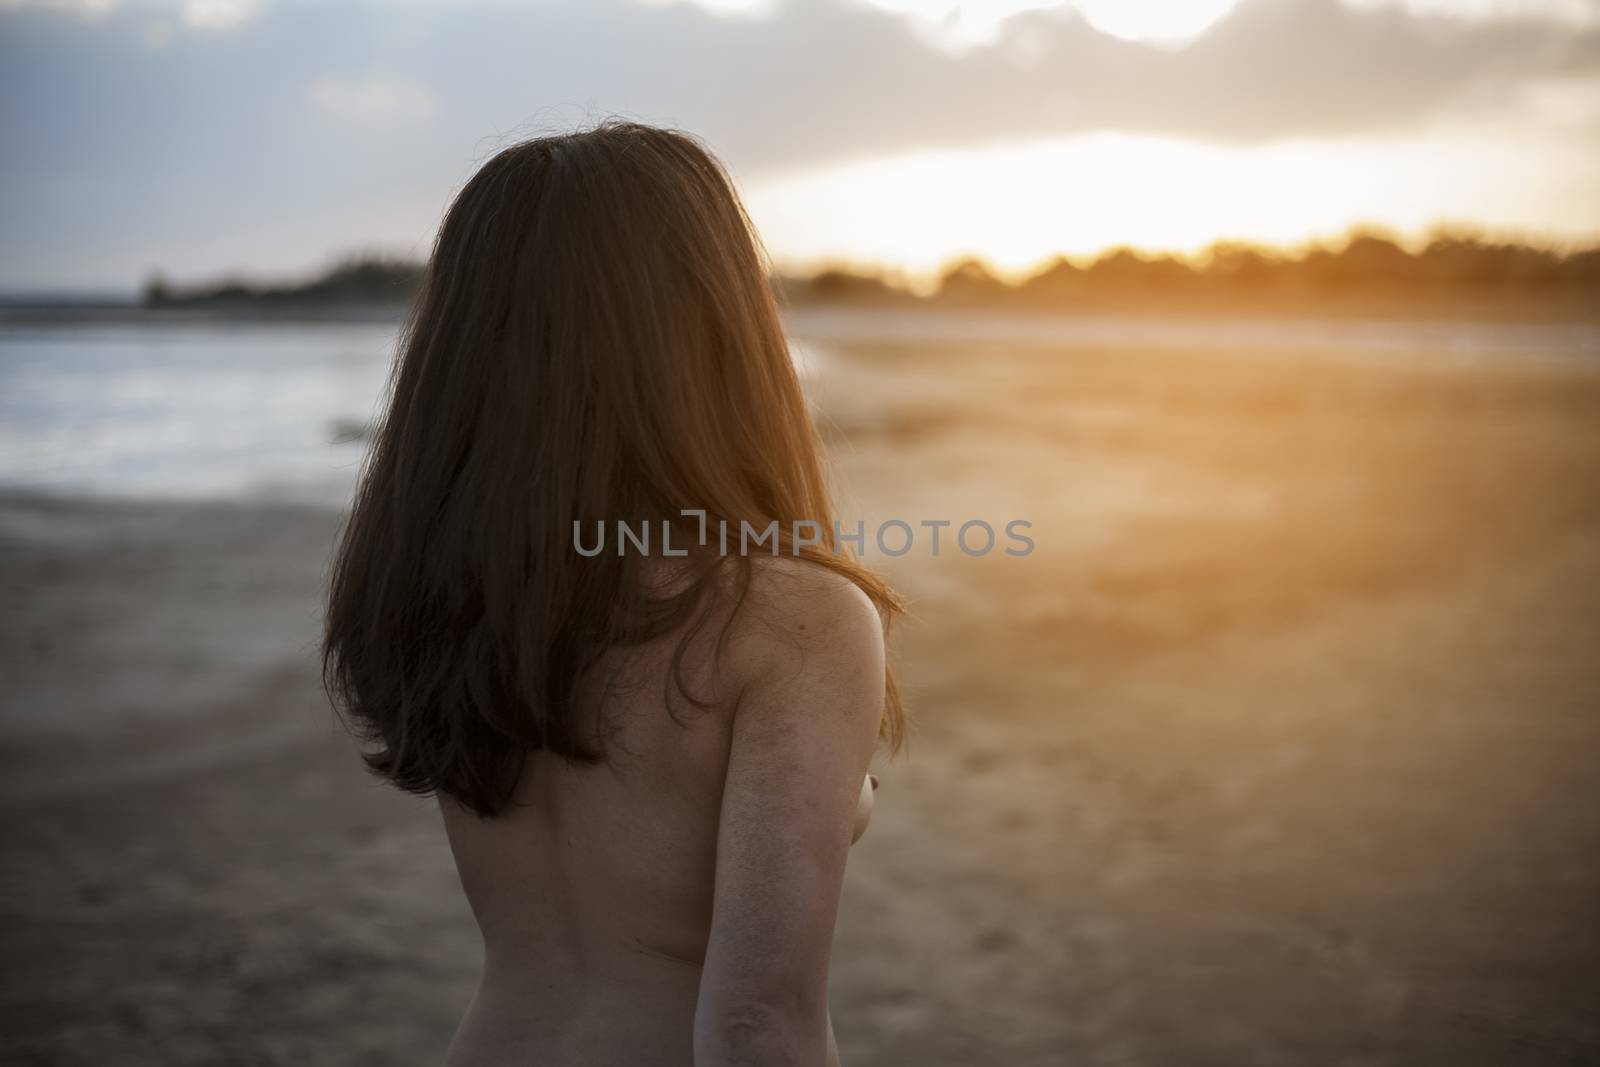 Naked carefree girl on beach with sunset in background by snep_photo